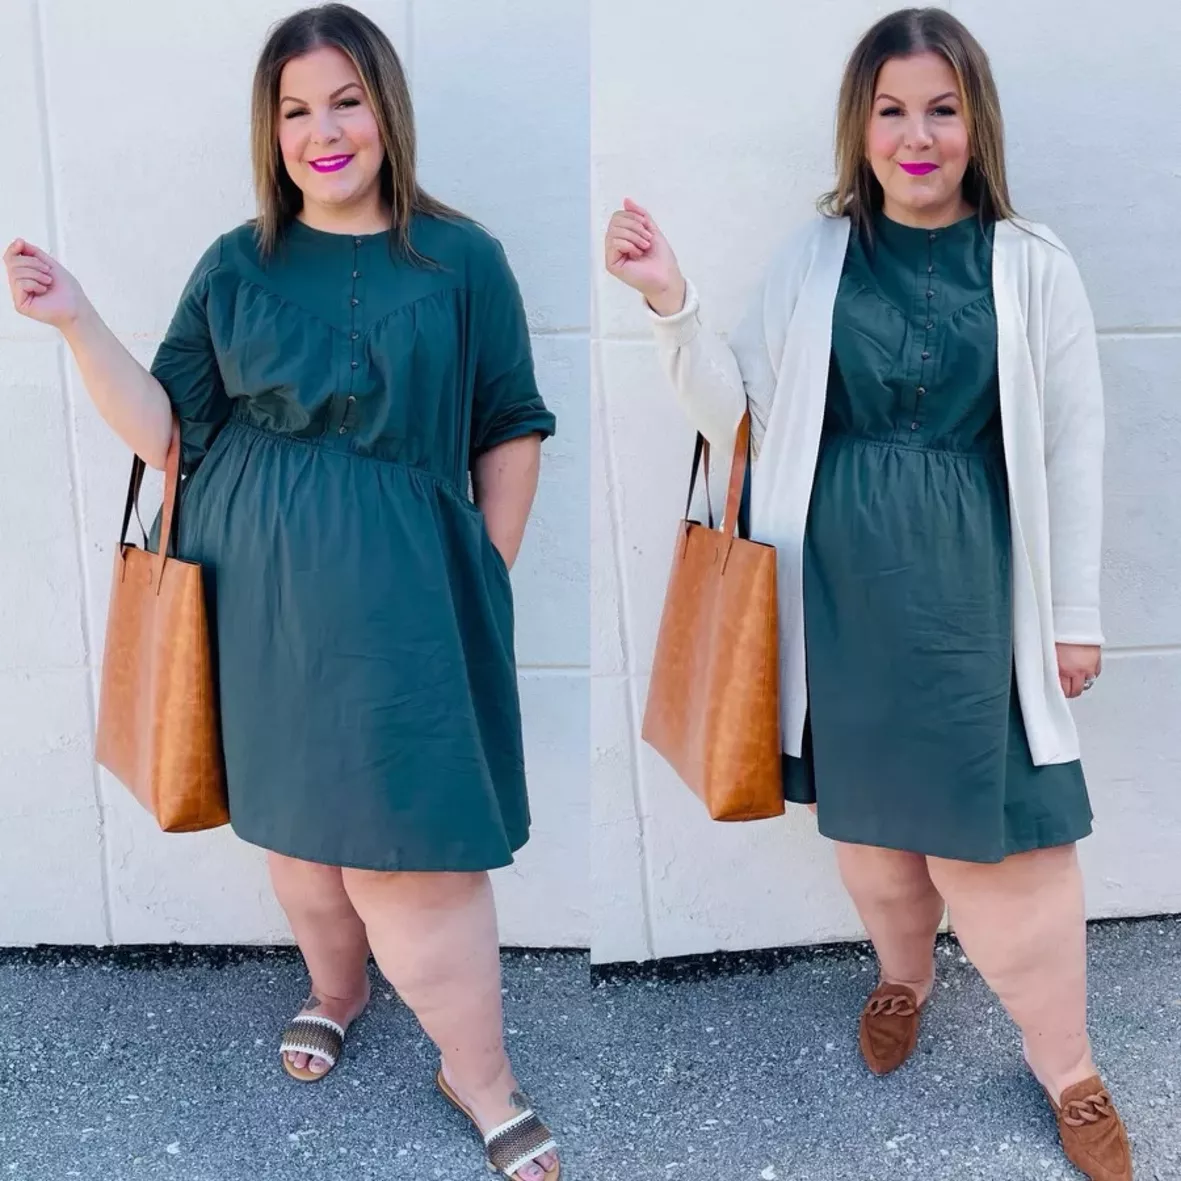 Stylish Plus Size Outfit Ideas for a Fabulous Summer